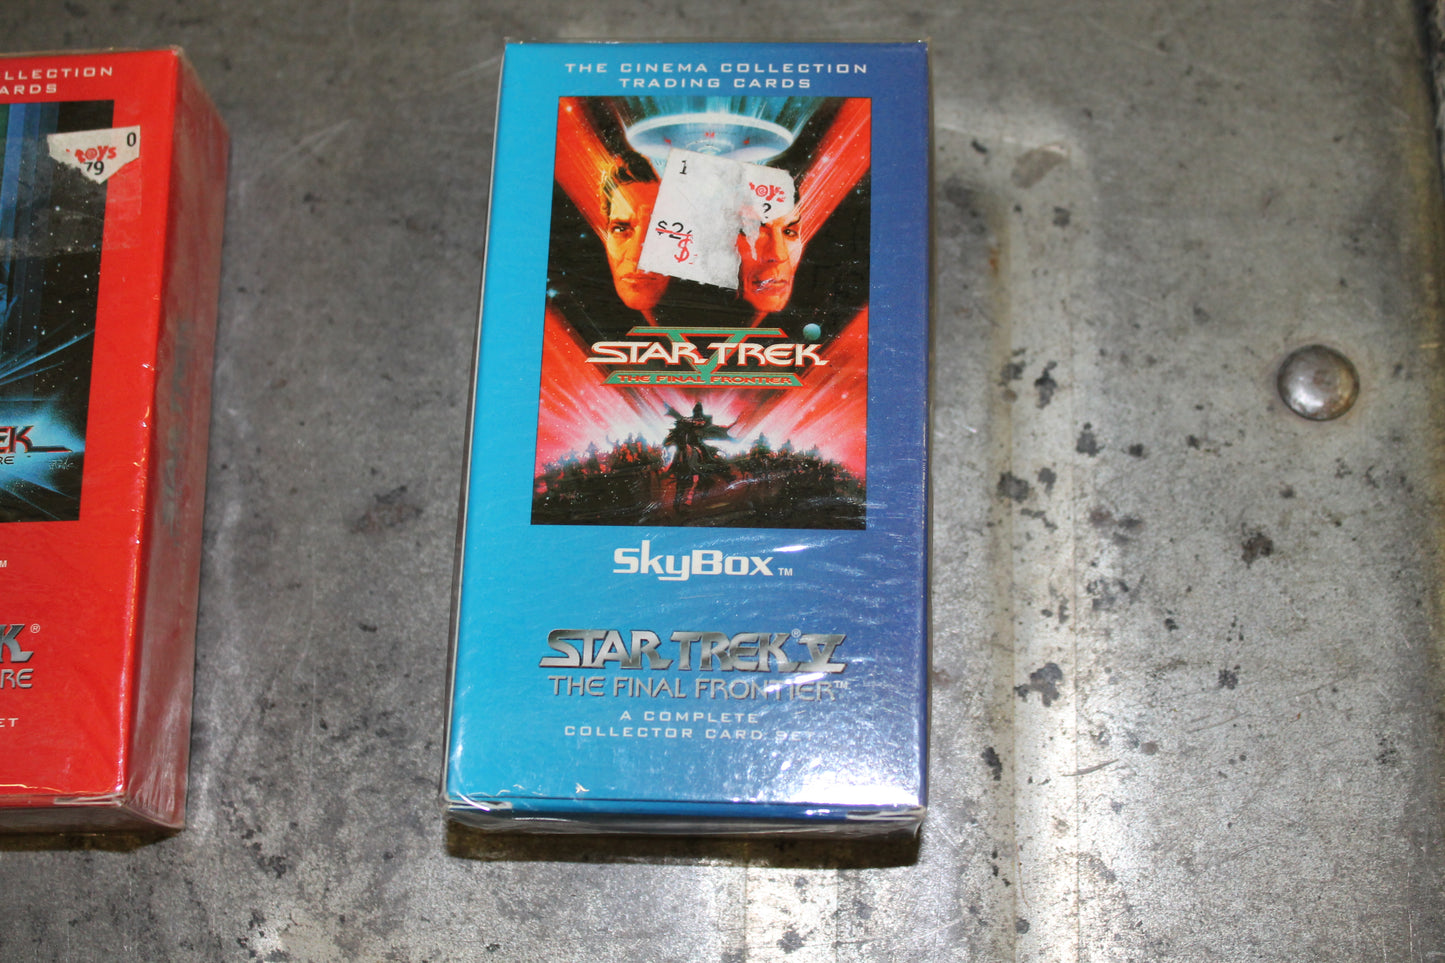 Skybox Cinema Collectors Edition Star Trek V the Undiscovered Country